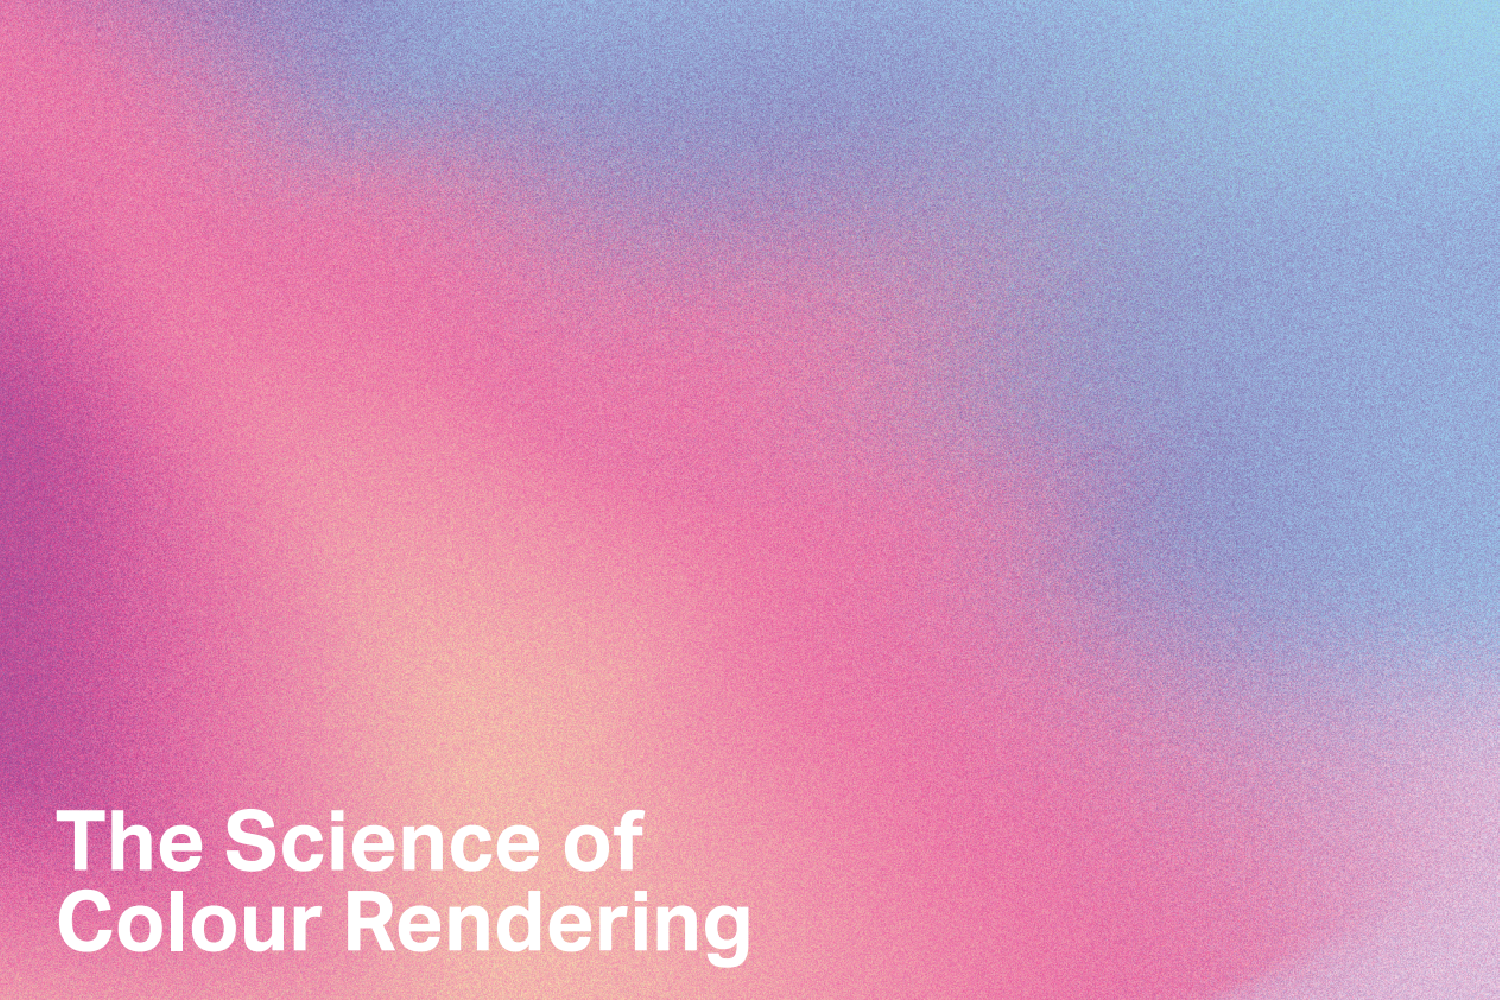 The Science of Colour Rendering